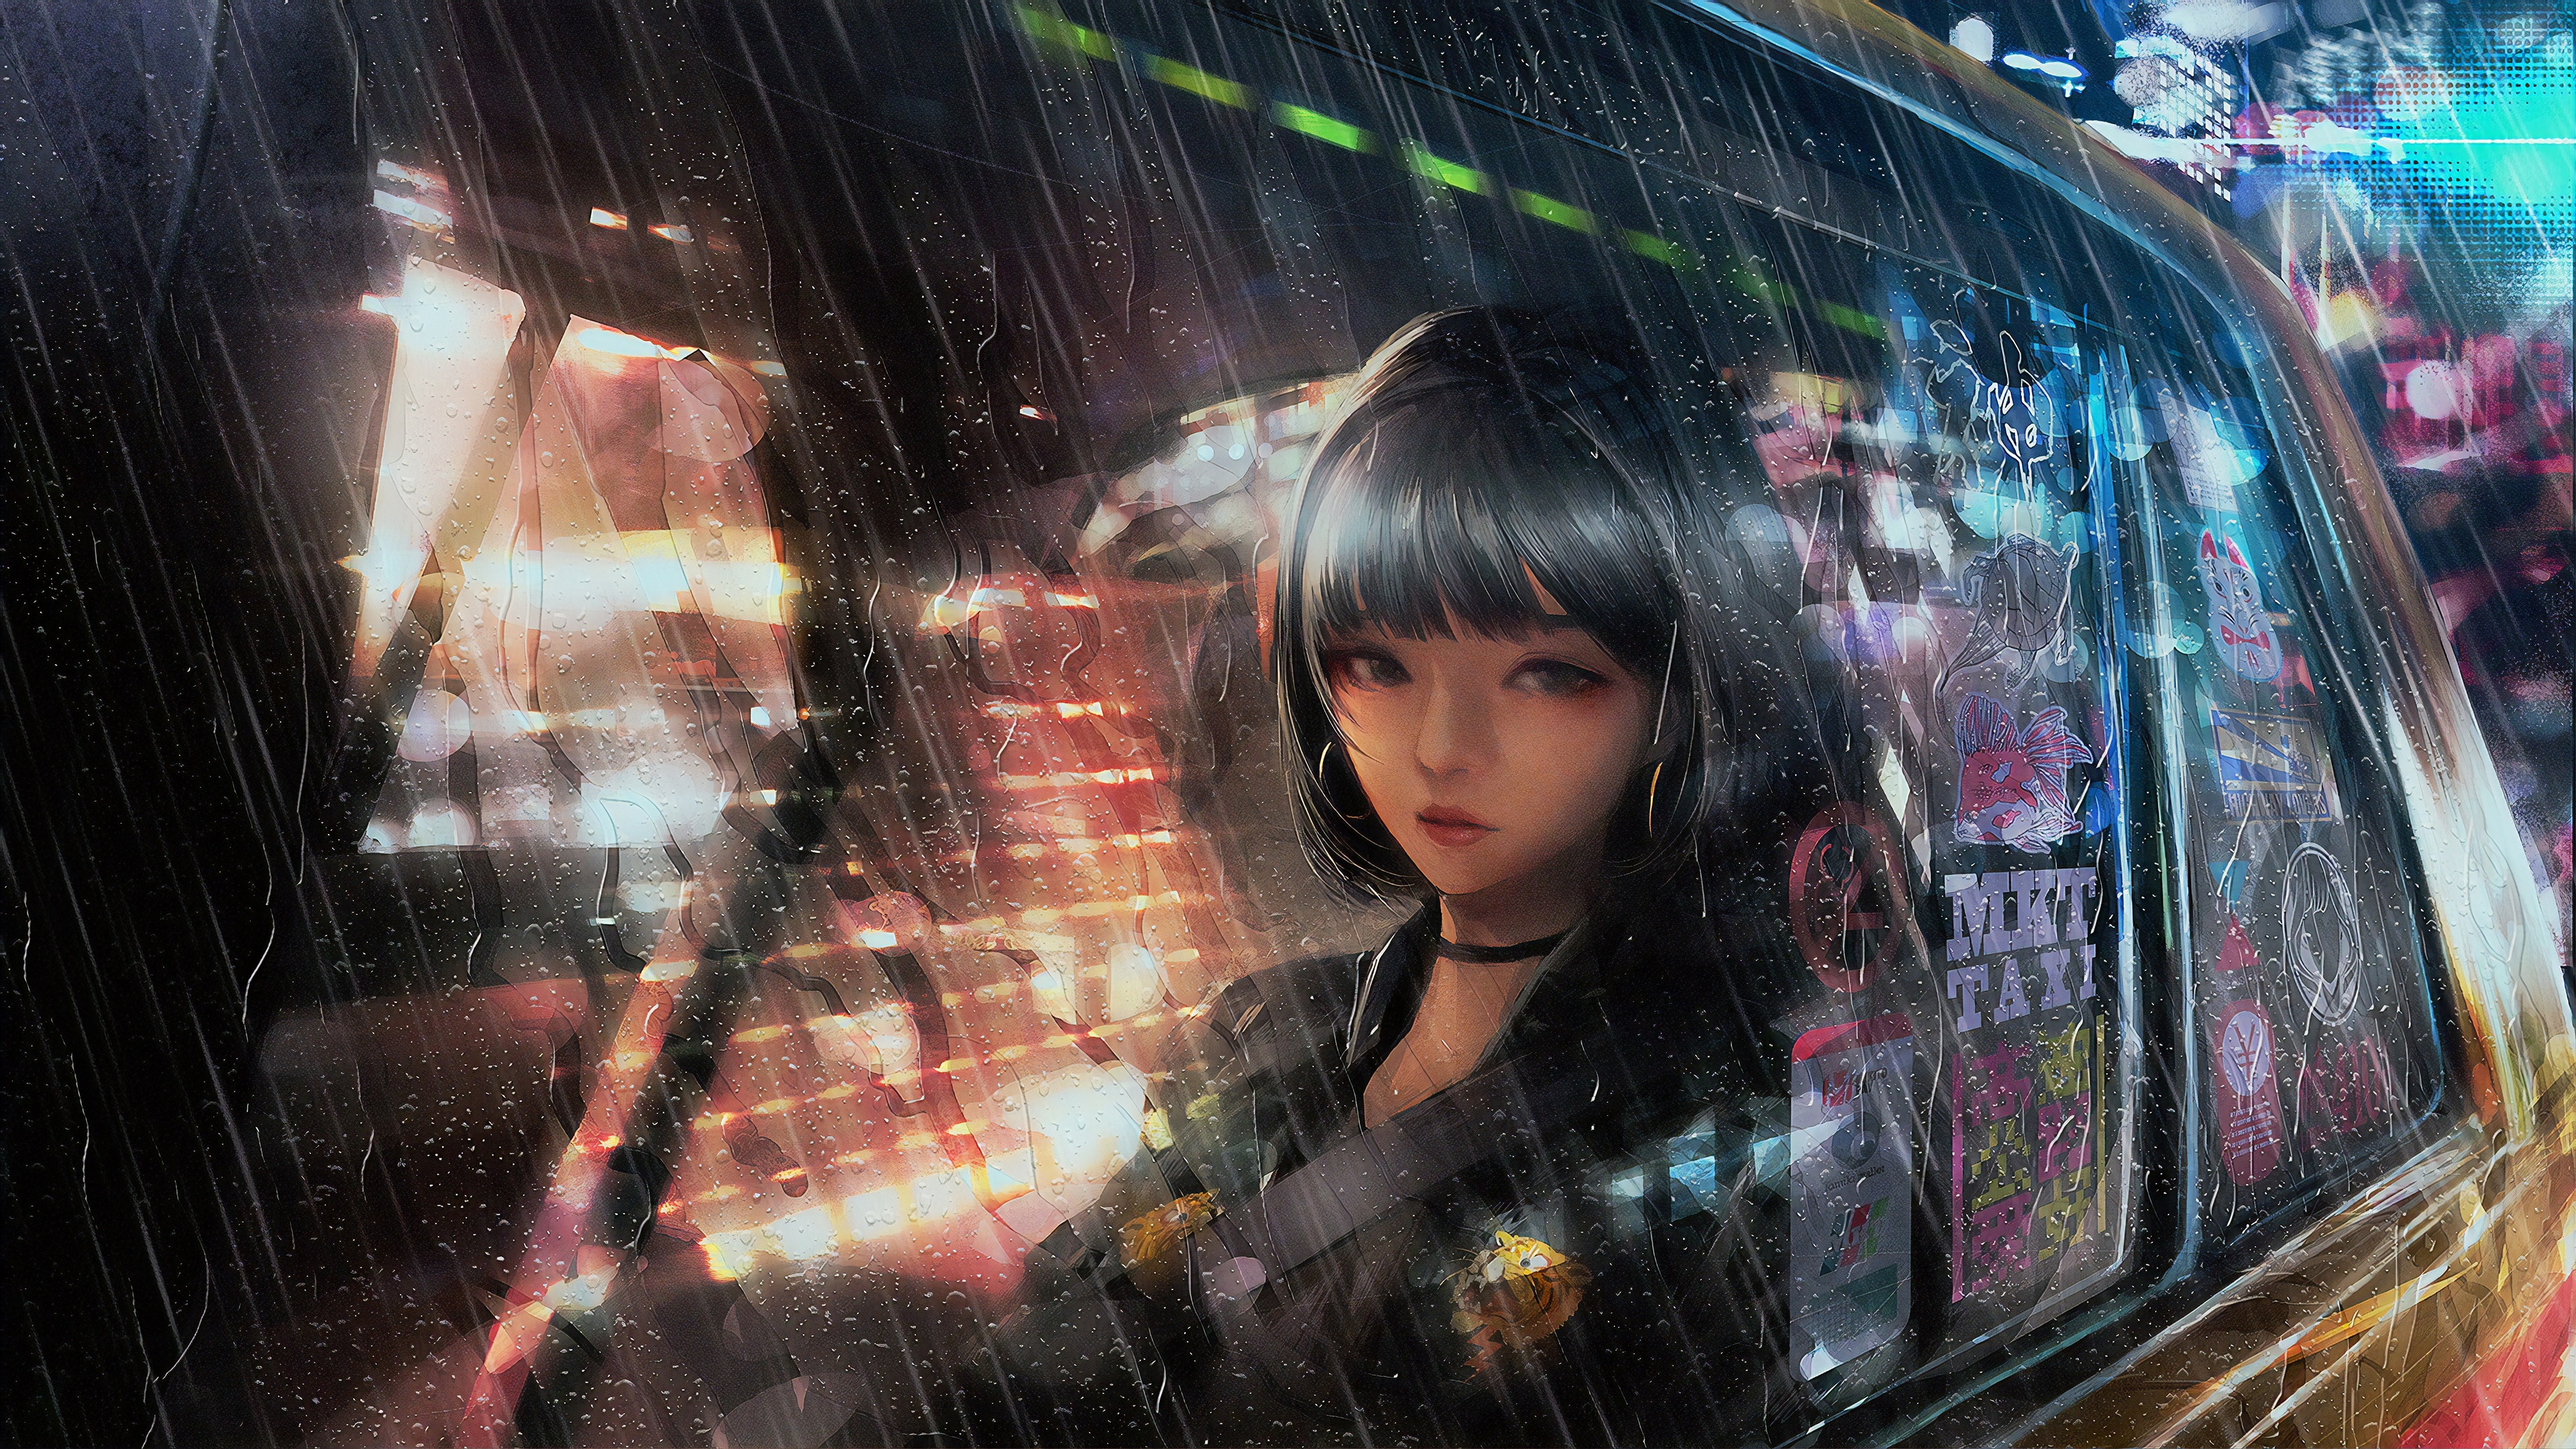 Anime girl in a taxi on a rainy night wallpaper - backiee